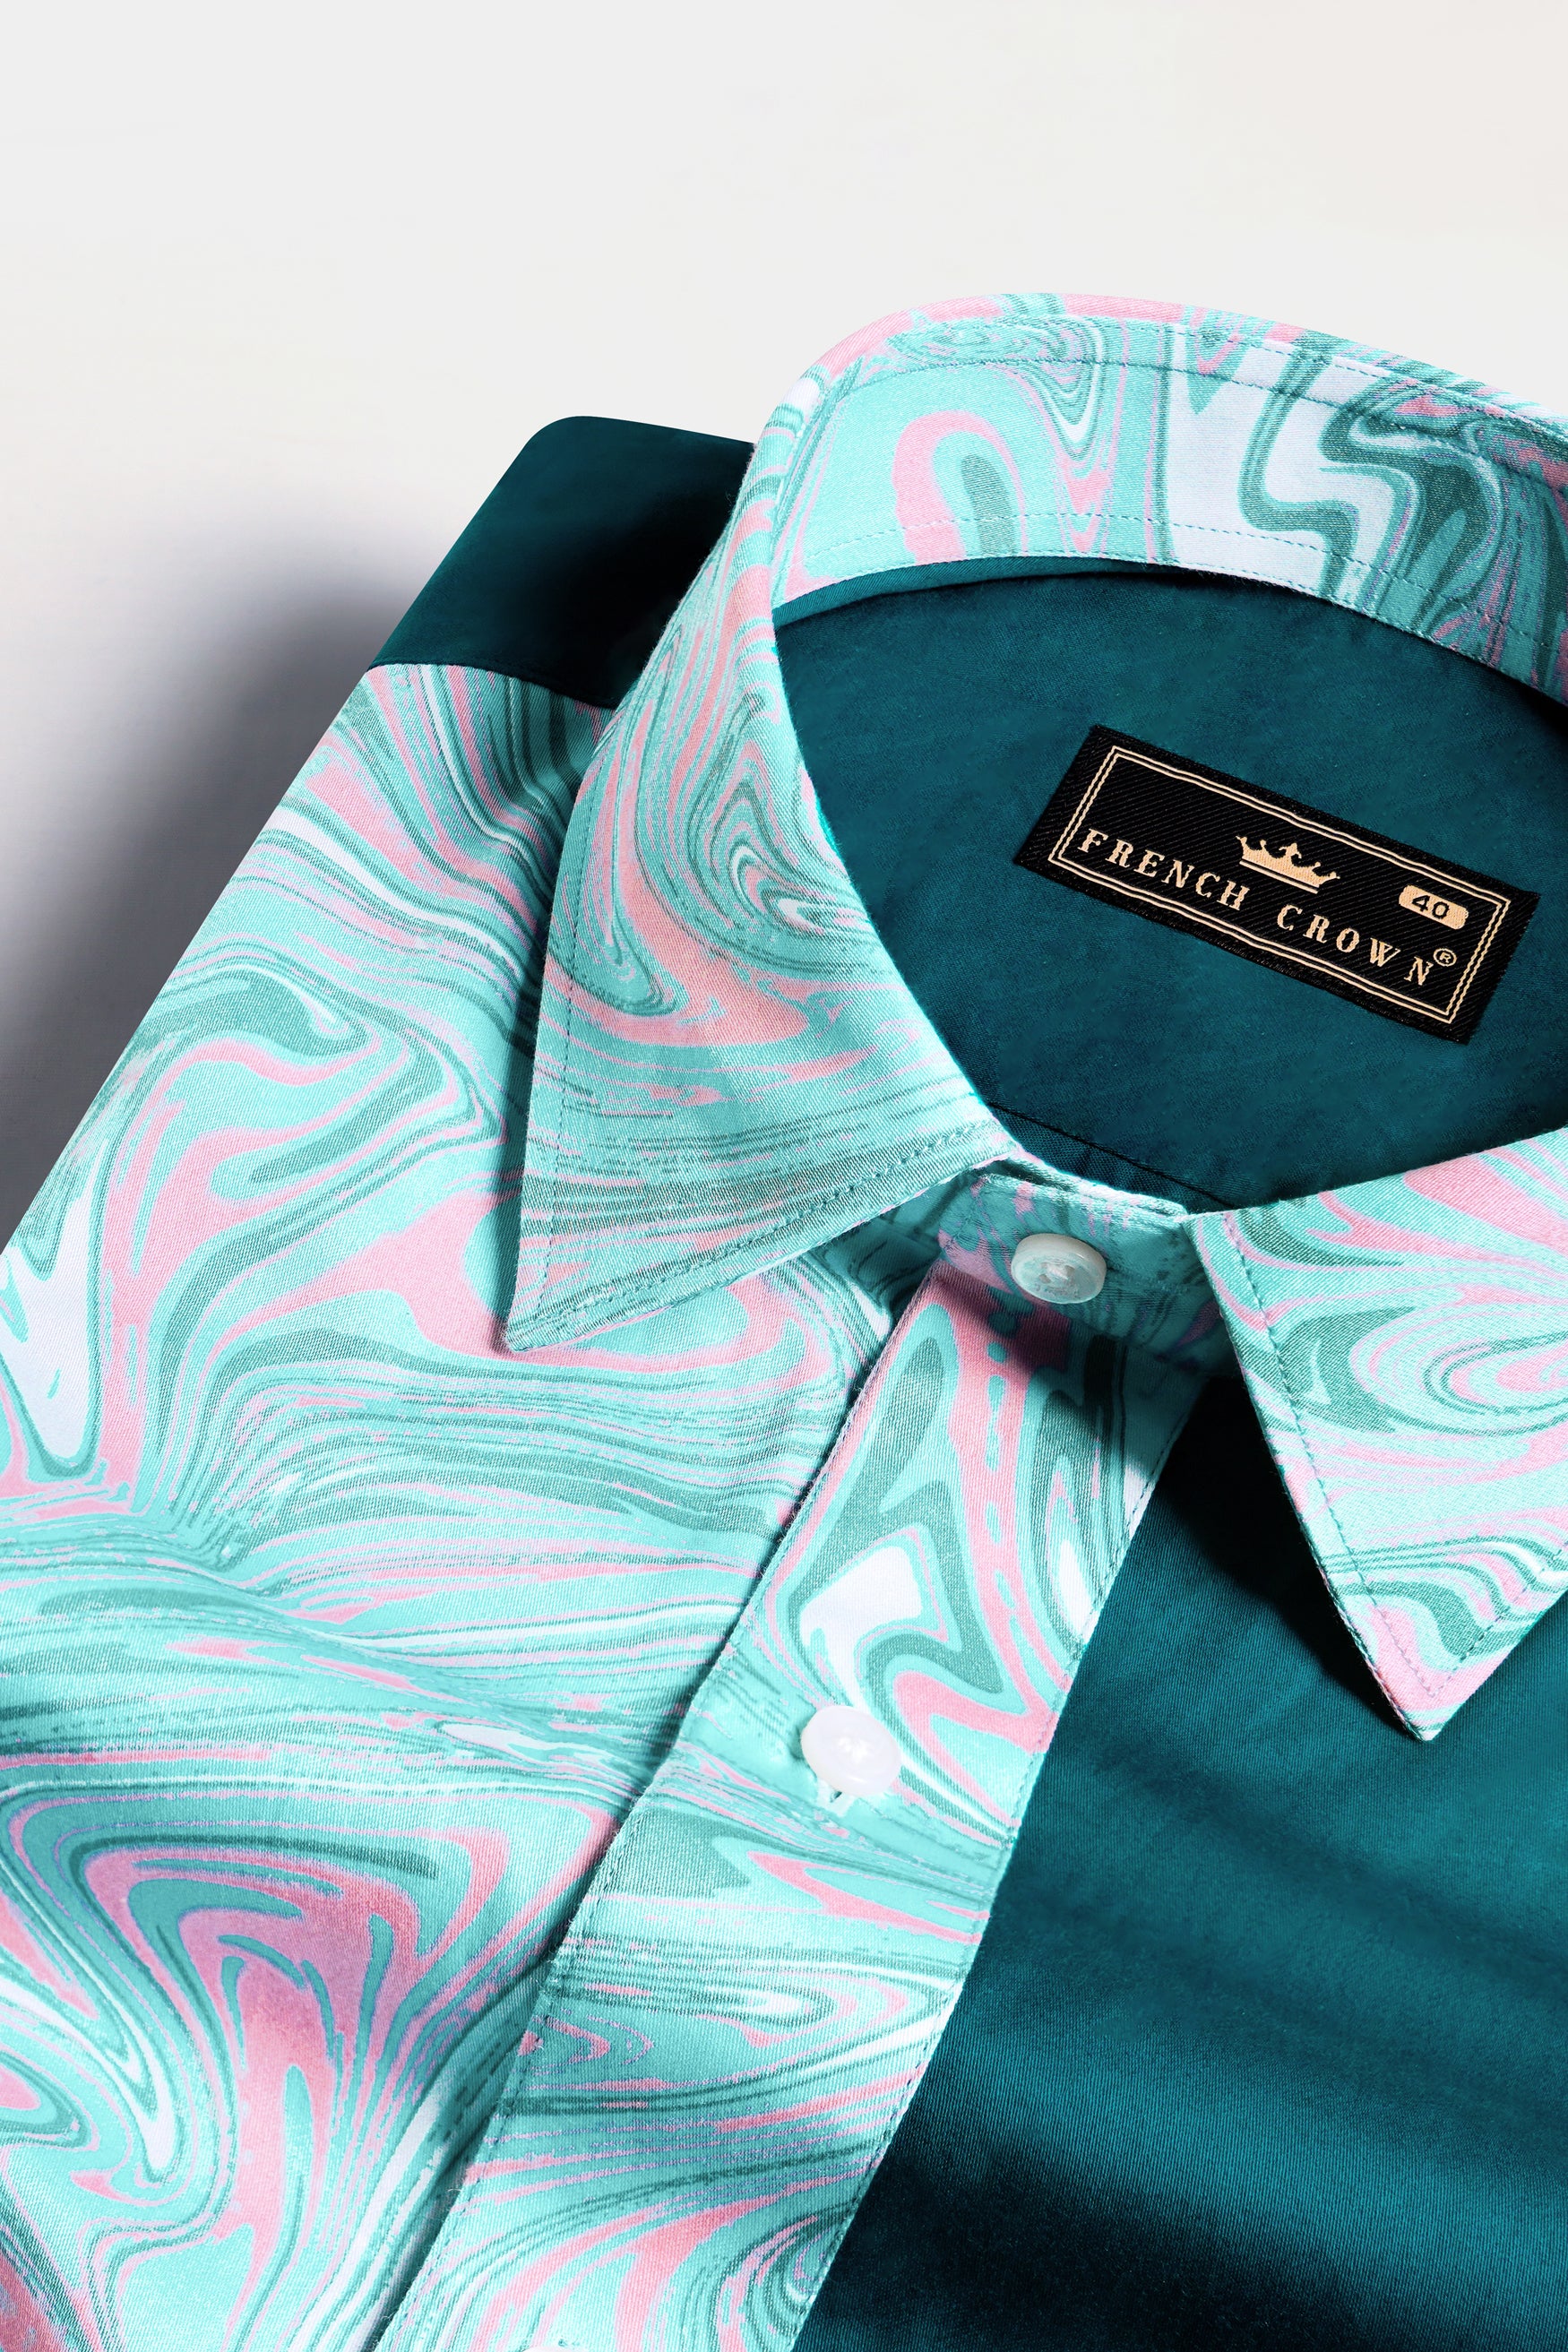 Teal Green Spider and Tiger Embroidered with Blizzard Blue and Cavern Pink Marble Printed Subtle Sheen Super Soft Premium Cotton Designer Shirt 11949-E326-38, 11949-E326-H-38, 11949-E326-39, 11949-E326-H-39, 11949-E326-40, 11949-E326-H-40, 11949-E326-42, 11949-E326-H-42, 11949-E326-44, 11949-E326-H-44, 11949-E326-46, 11949-E326-H-46, 11949-E326-48, 11949-E326-H-48, 11949-E326-50, 11949-E326-H-50, 11949-E326-52, 11949-E326-H-52